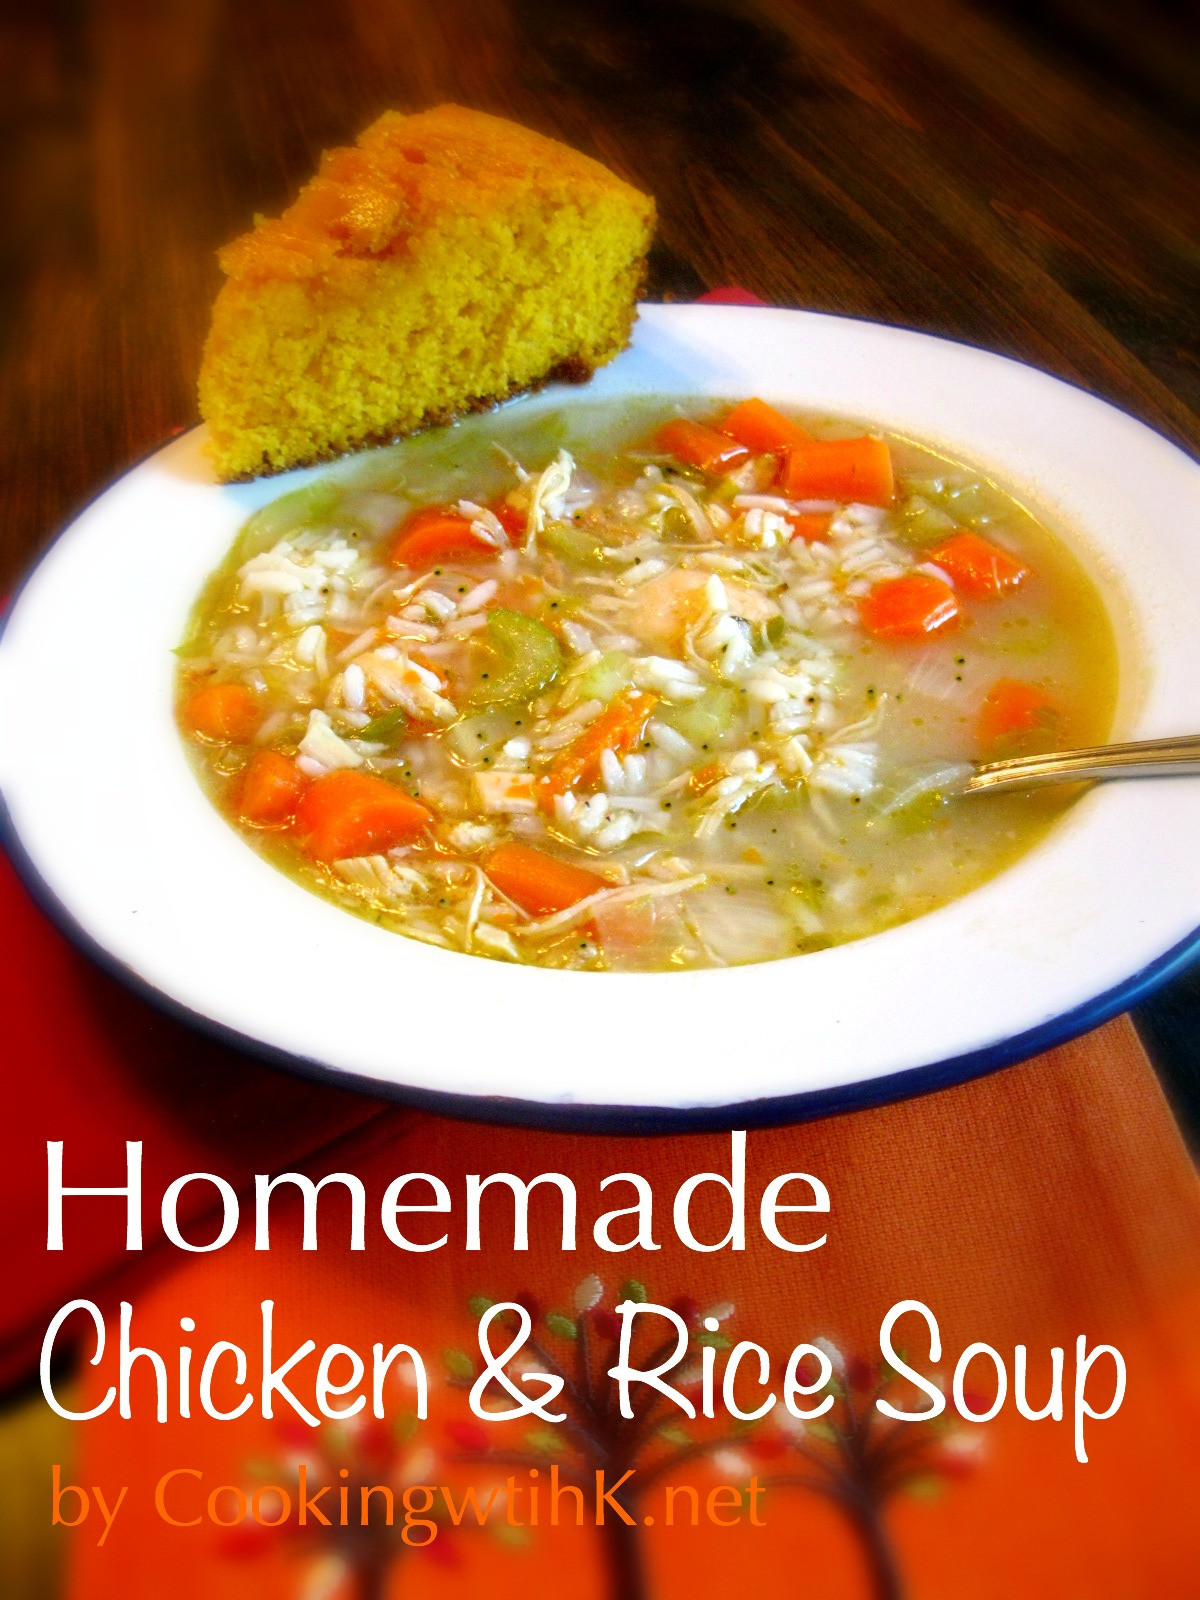 Homemade Chicken And Rice Soup
 Cooking with K Homemade Chicken & Rice Soup